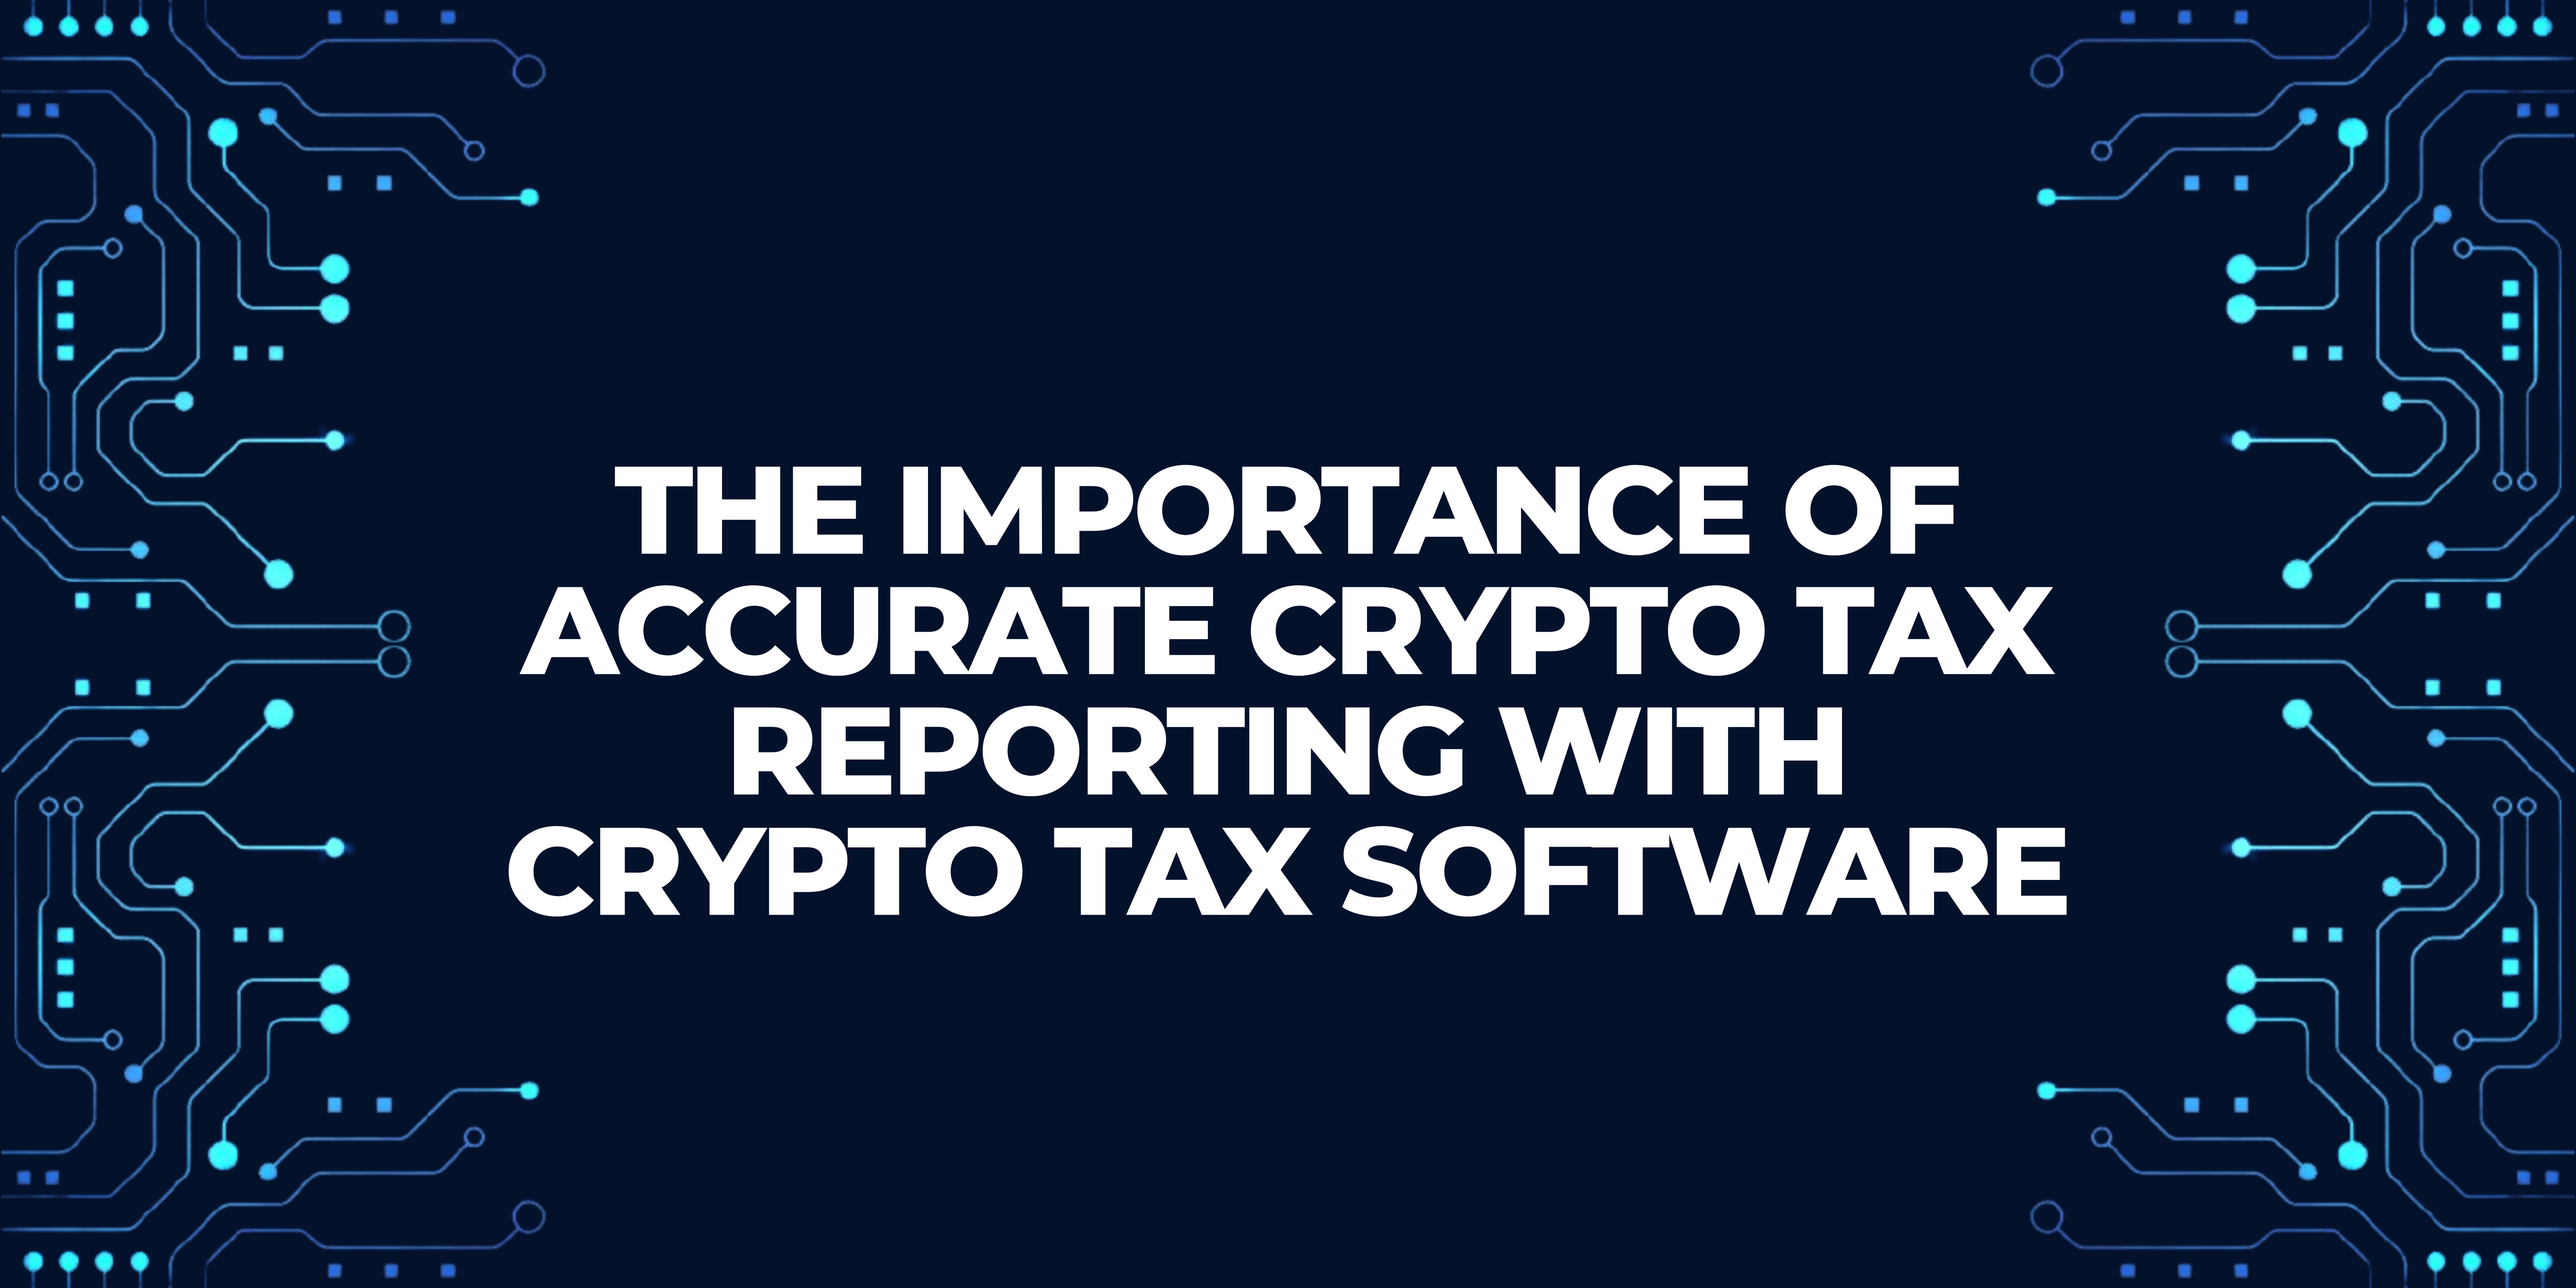 Accurate Crypto Tax Reporting